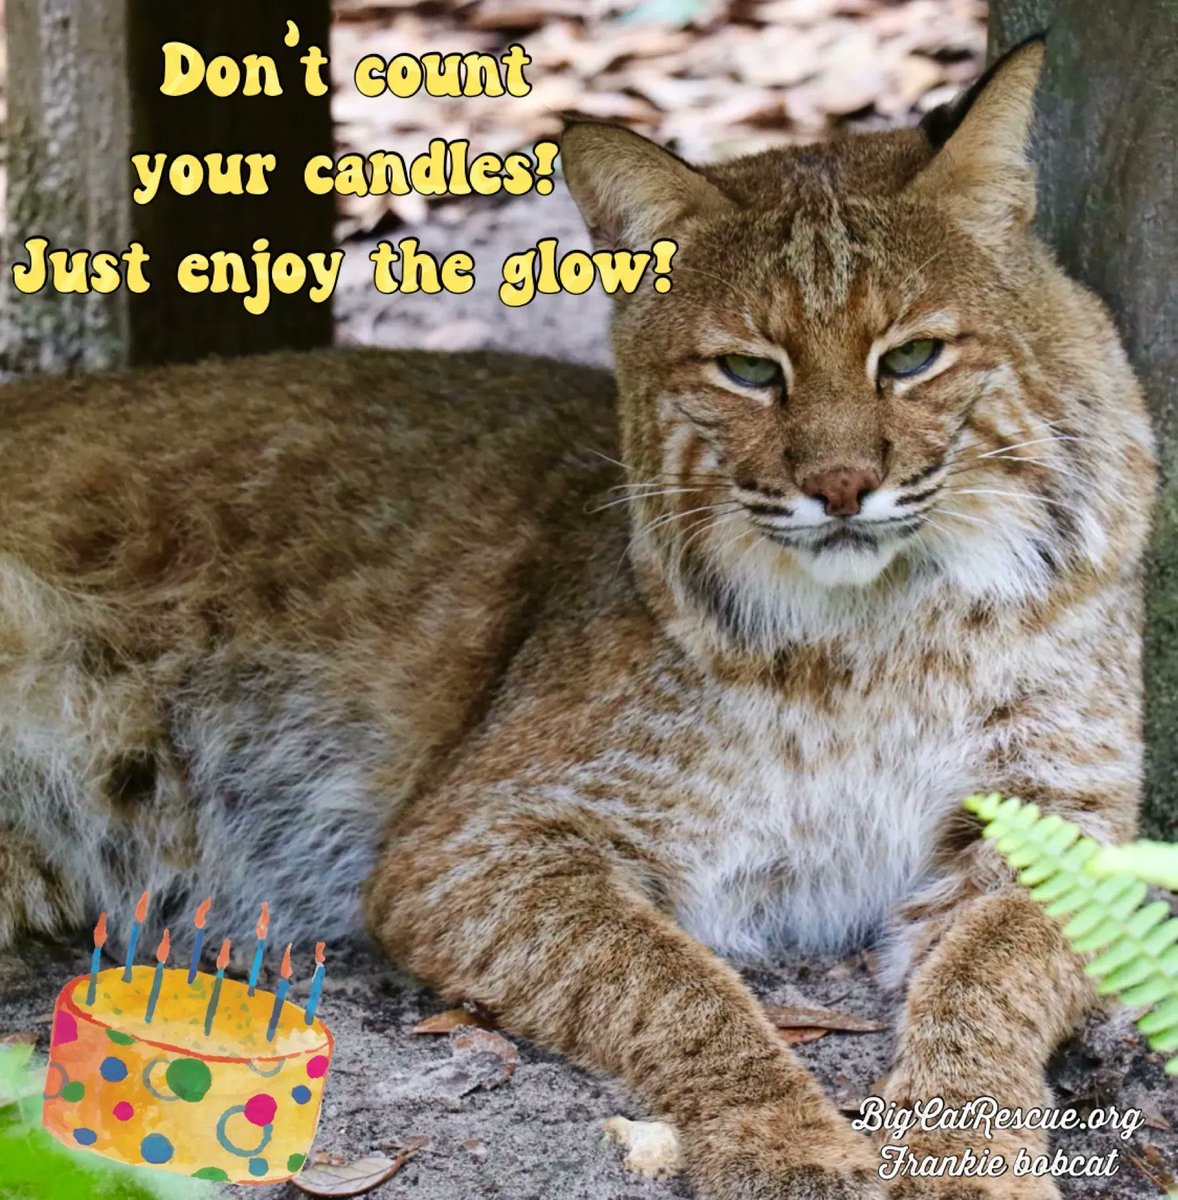 Happy birthday to our Frankie bobcat! 
“Don’t count your candles! Just enjoy the glow!”

#FrankieBobcat #BigCats #BigCatRescue #Rescue #Cats #Bobcat #HappyBirthday #BirthdayBoy #Celebrate #BirthdayCake #BirthdayCandles #CaroleBaskin